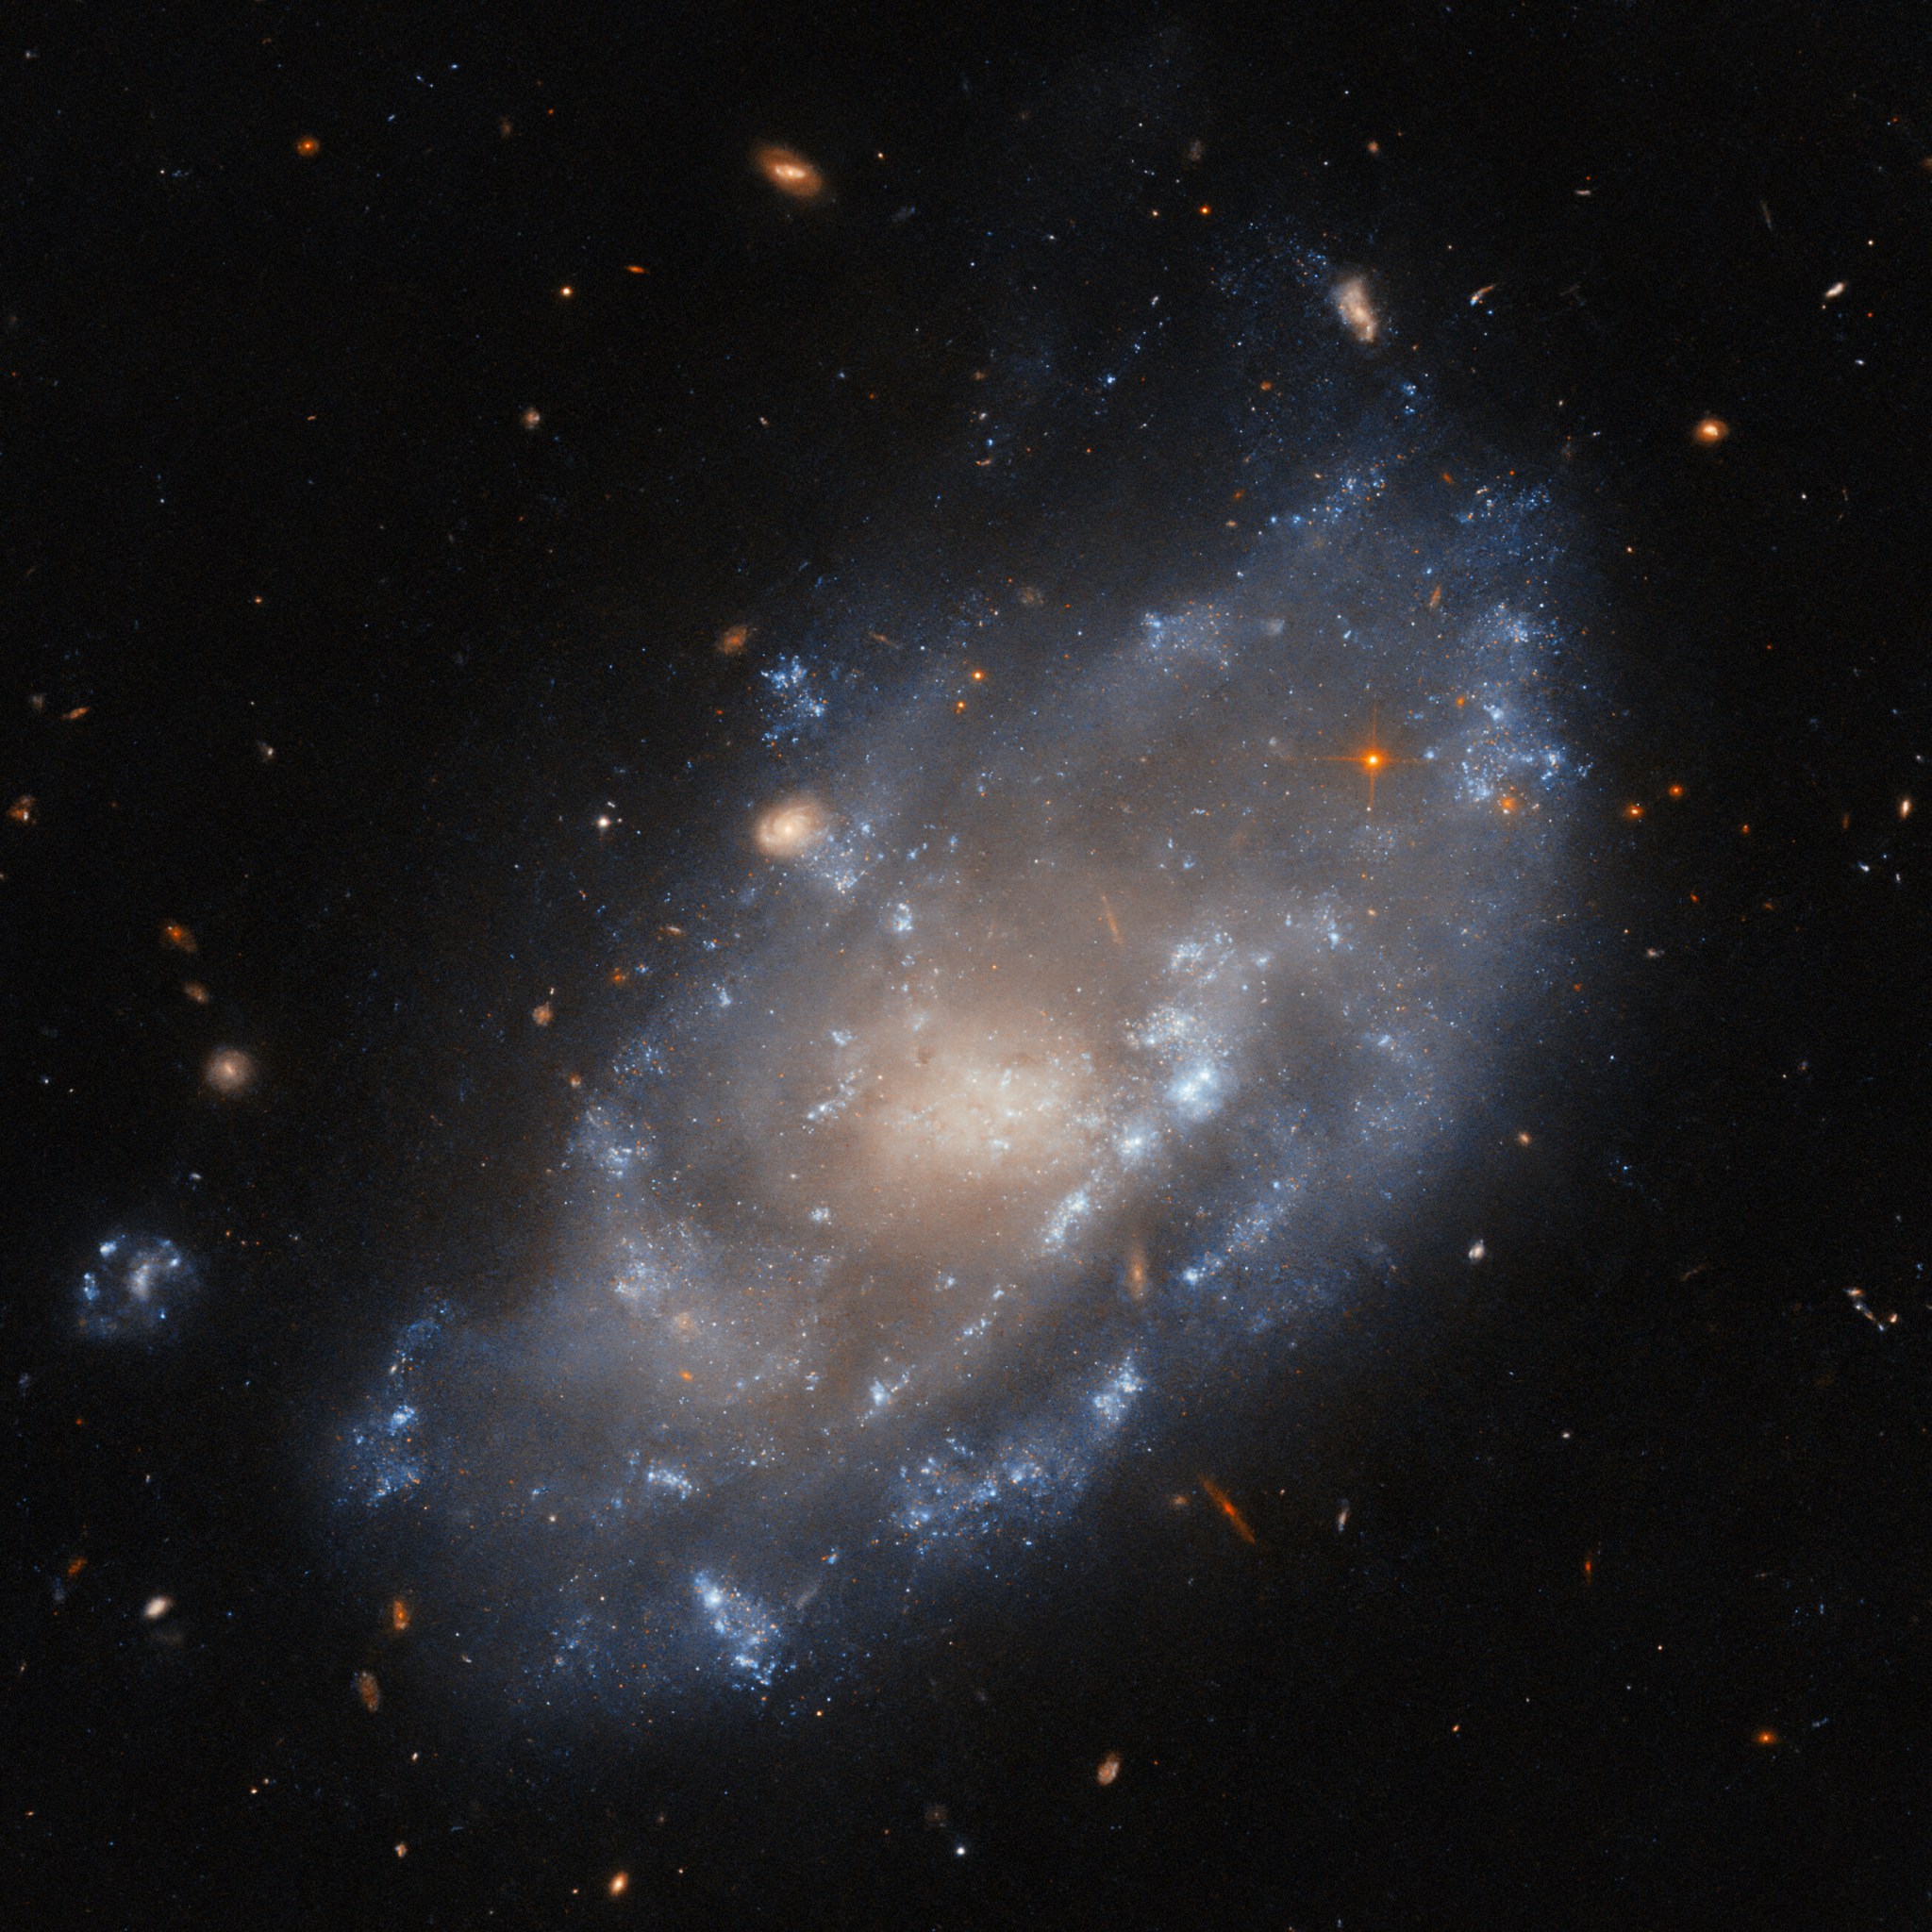 This NASA/ESA Hubble Space Telescope image features the dwarf galaxy IC 776.